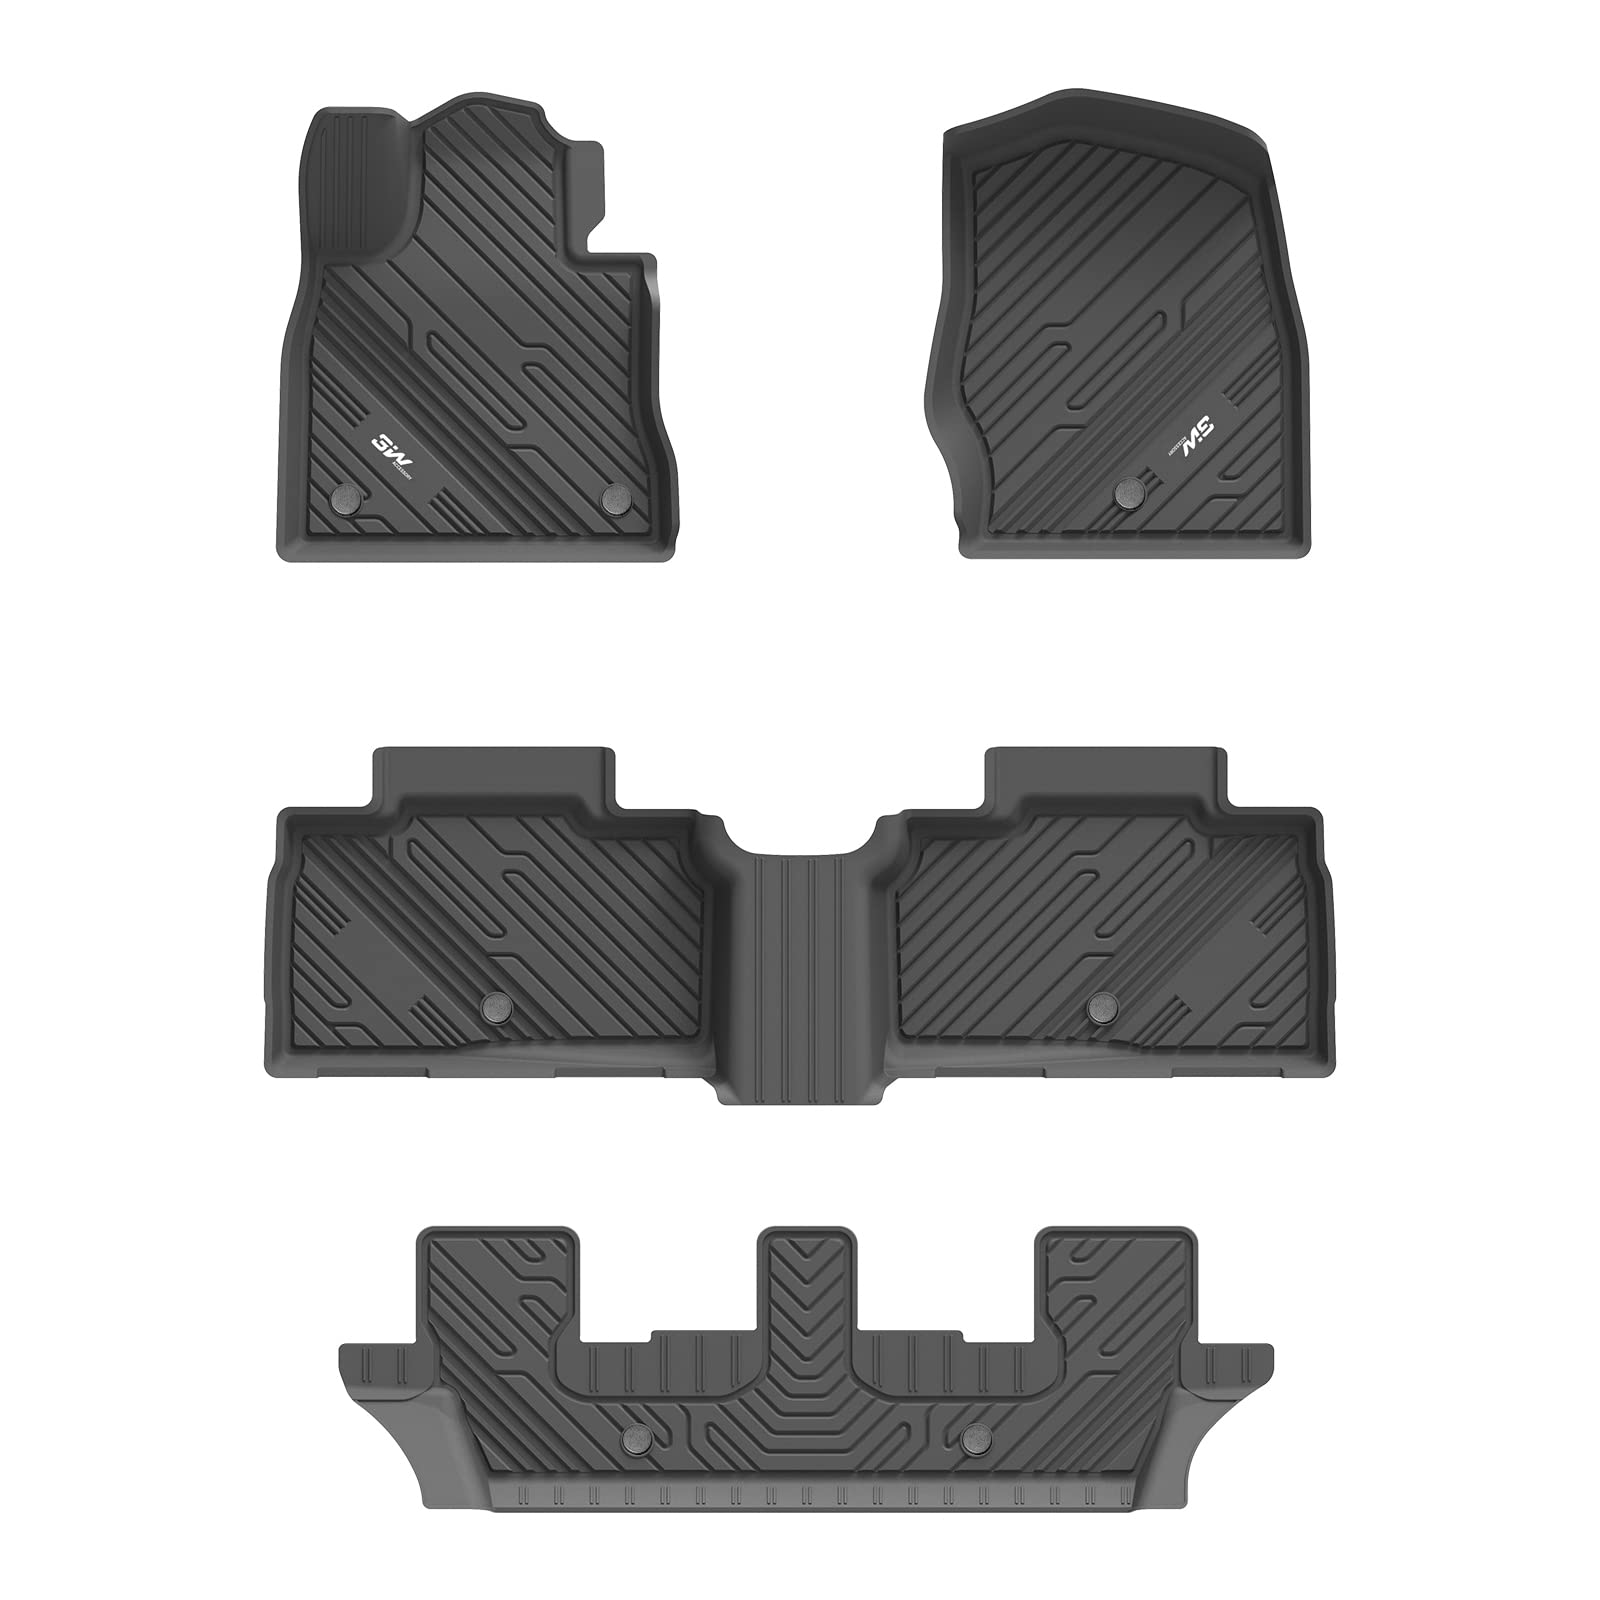 3W Ford Explorer 2020-2023 Custom Floor Mats TPE Material & All-Weather Protection Vehicles & Parts 3W 2020-2023 Explorer 2020-2023 7 Seat 1st&2nd&3rd Row Mats